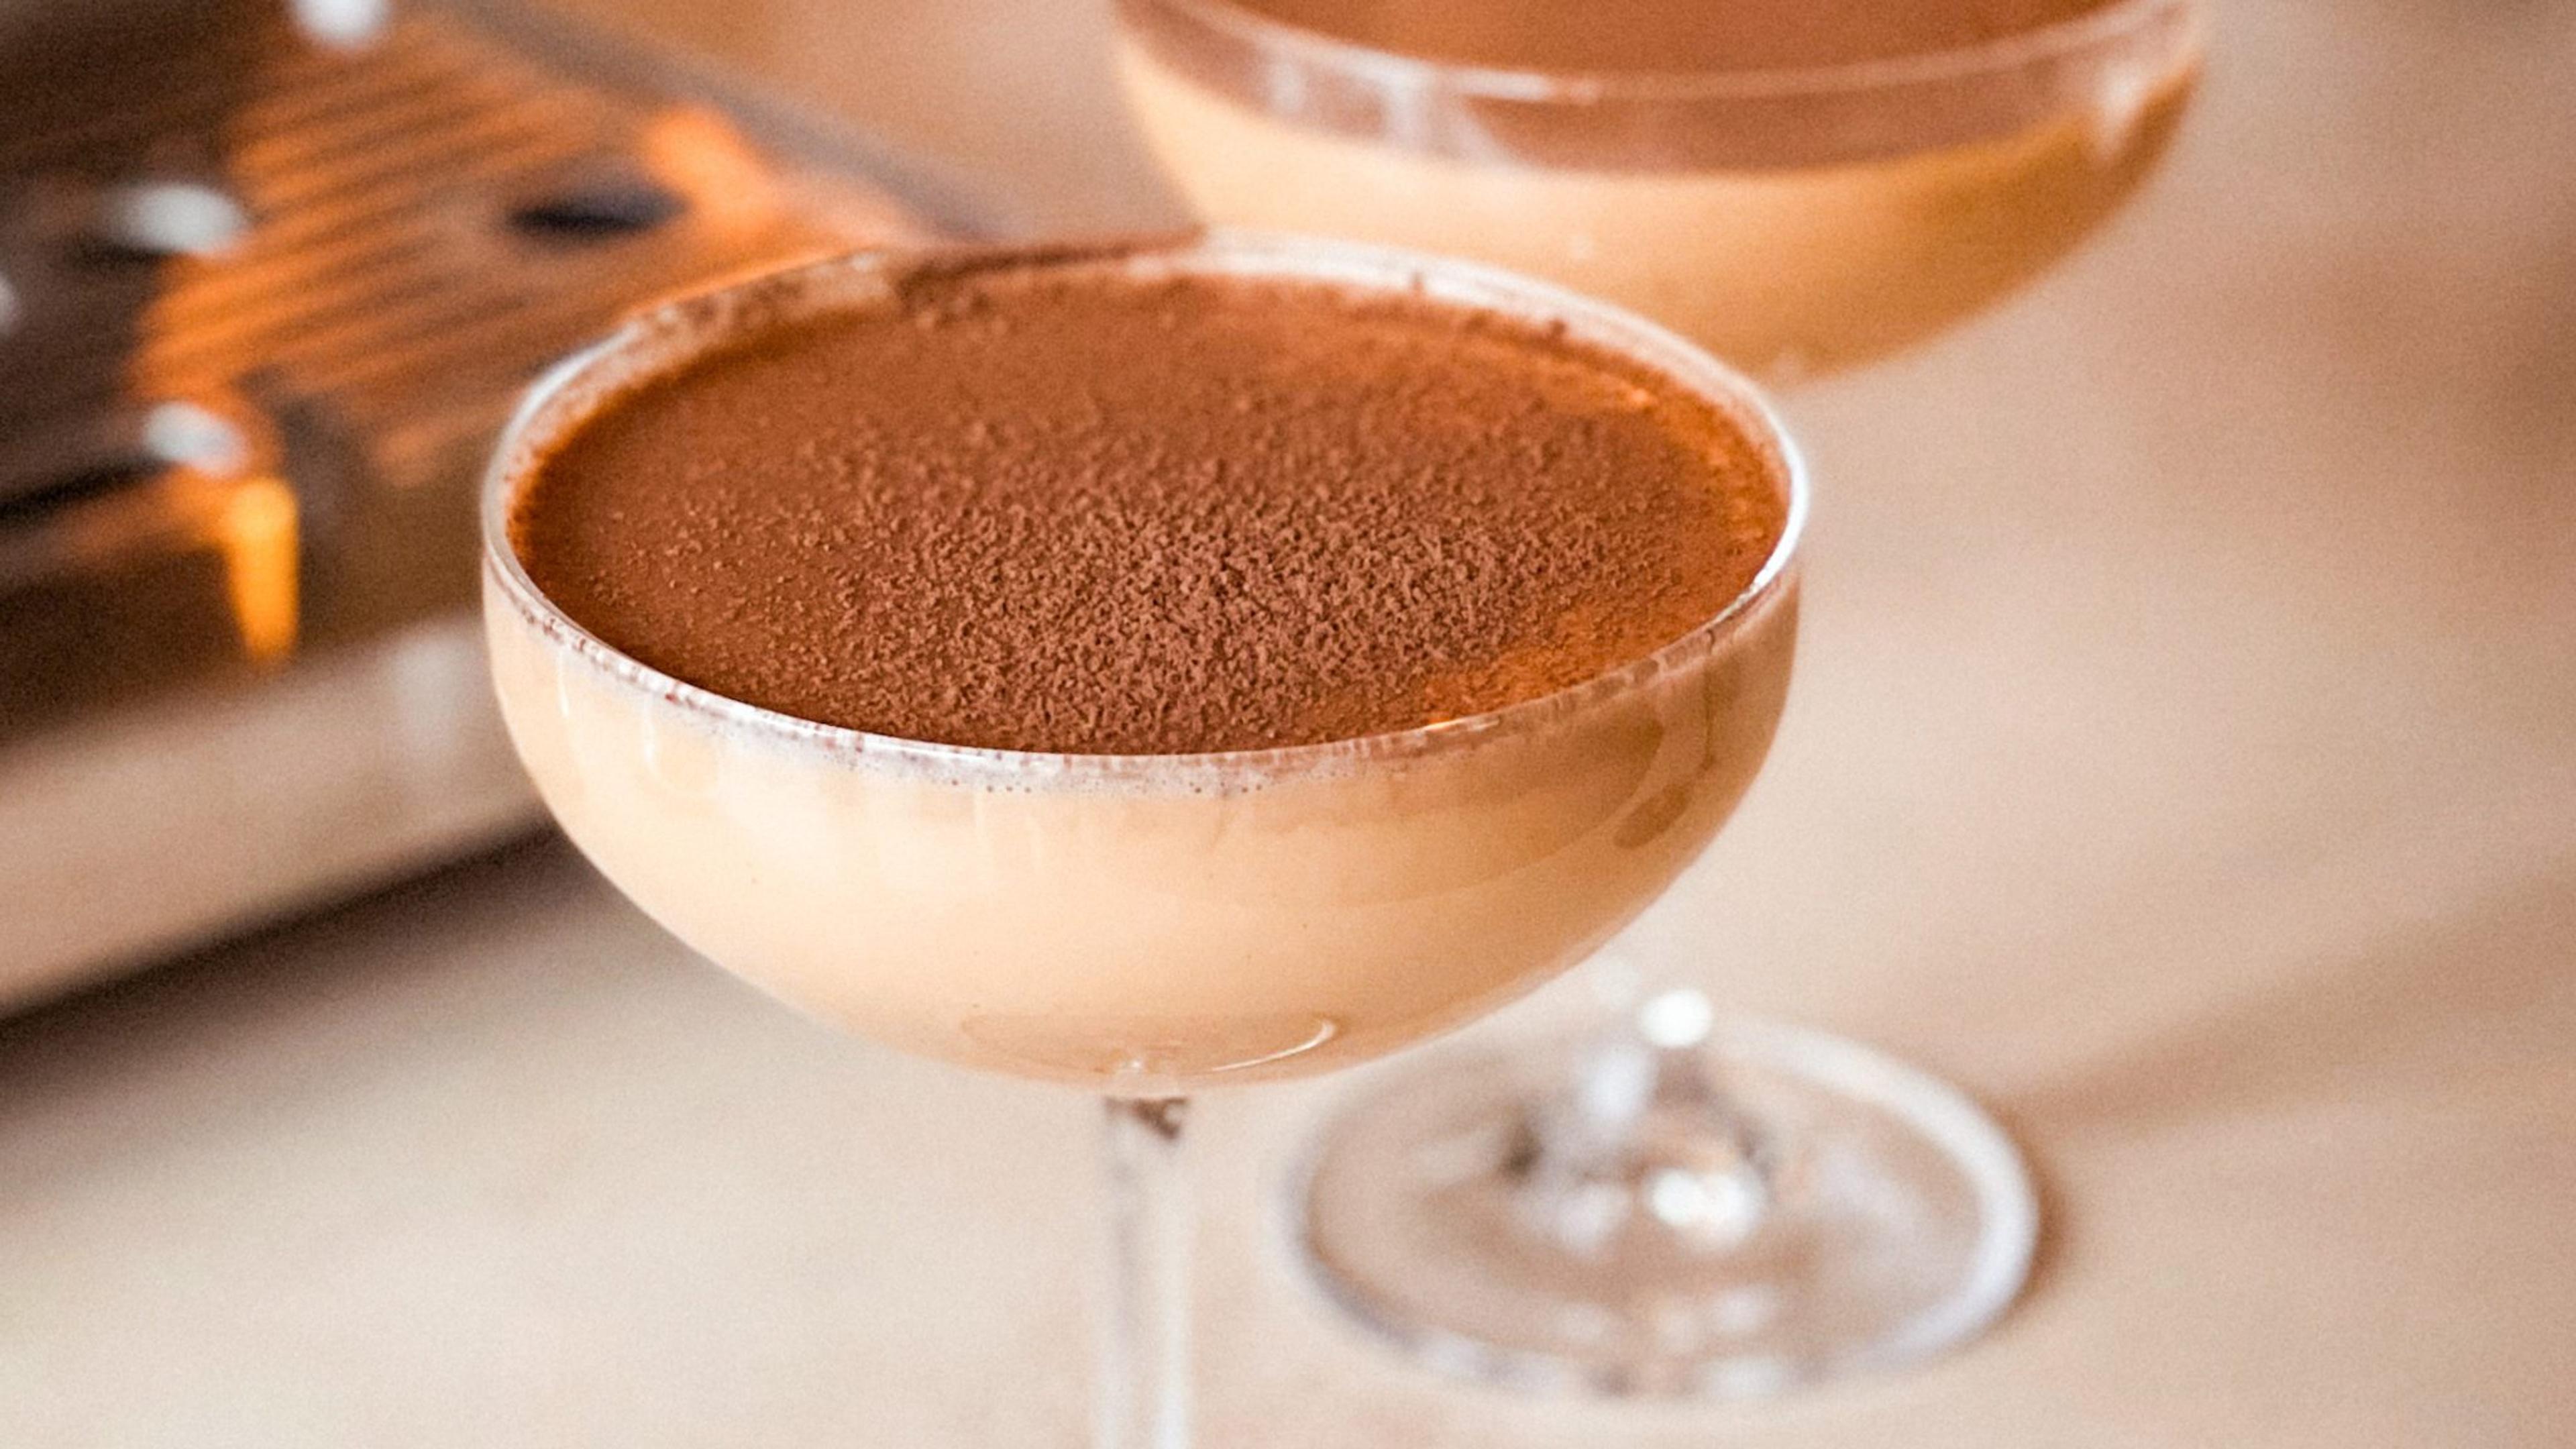 This recipe only calls for 4 ingredients, all of which can likely already be found in your kitchen: espresso, oat milk, brown sugar, and cocoa powder. This mocktail espresso martini offers a caffeine kick and the same aesthetic of the classic drink while being healthier and alcohol free.   